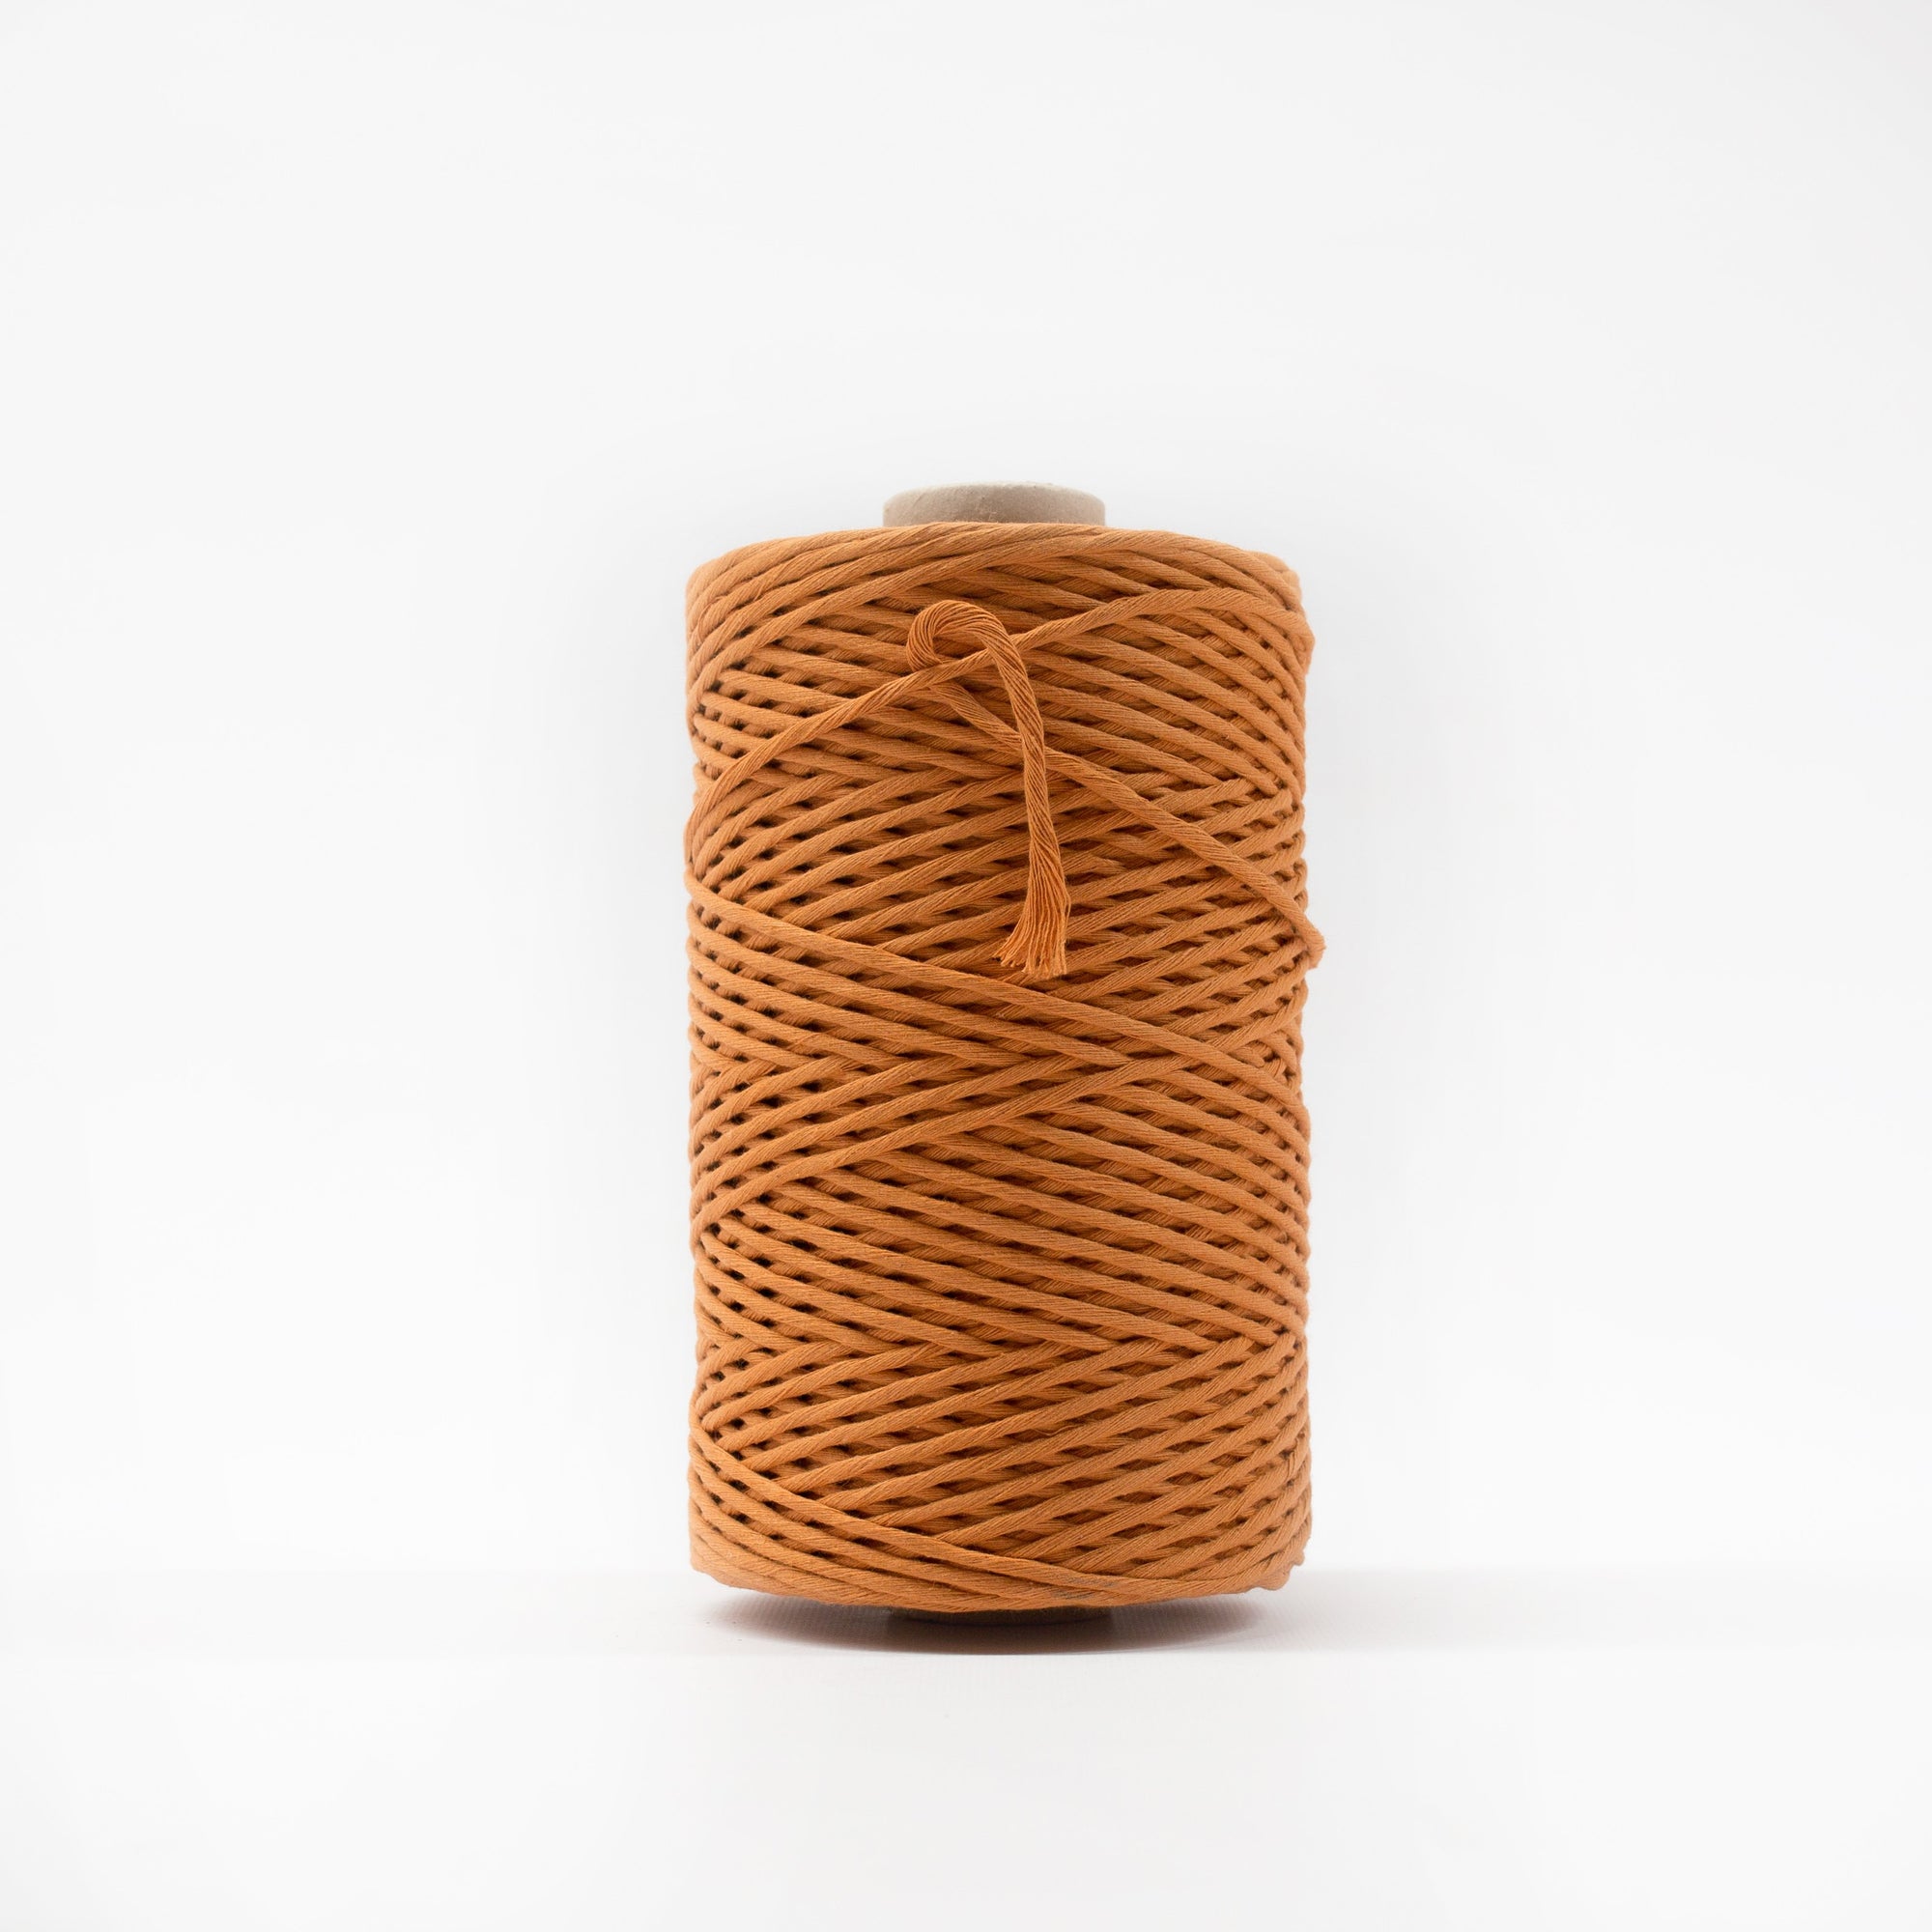 Mary Maker Studio Luxe Colour Cotton 3mm 1KG Recycled Luxe Macrame String // Caramel macrame cotton macrame rope macrame workshop macrame patterns macrame